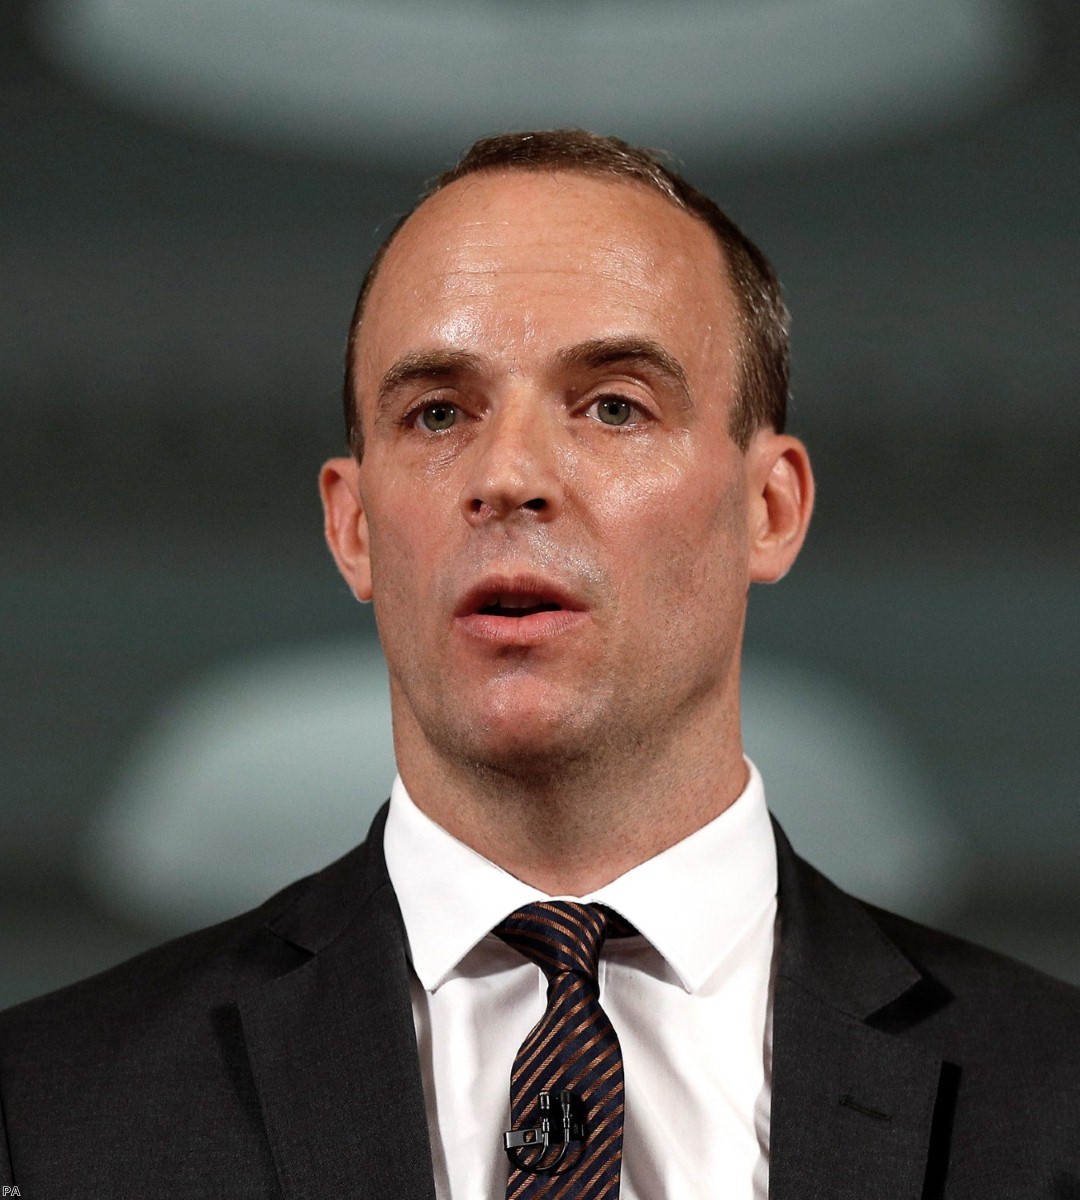 Dominic Raab, Brexit secretary, now faced by the consequences of the myths he used to promote.